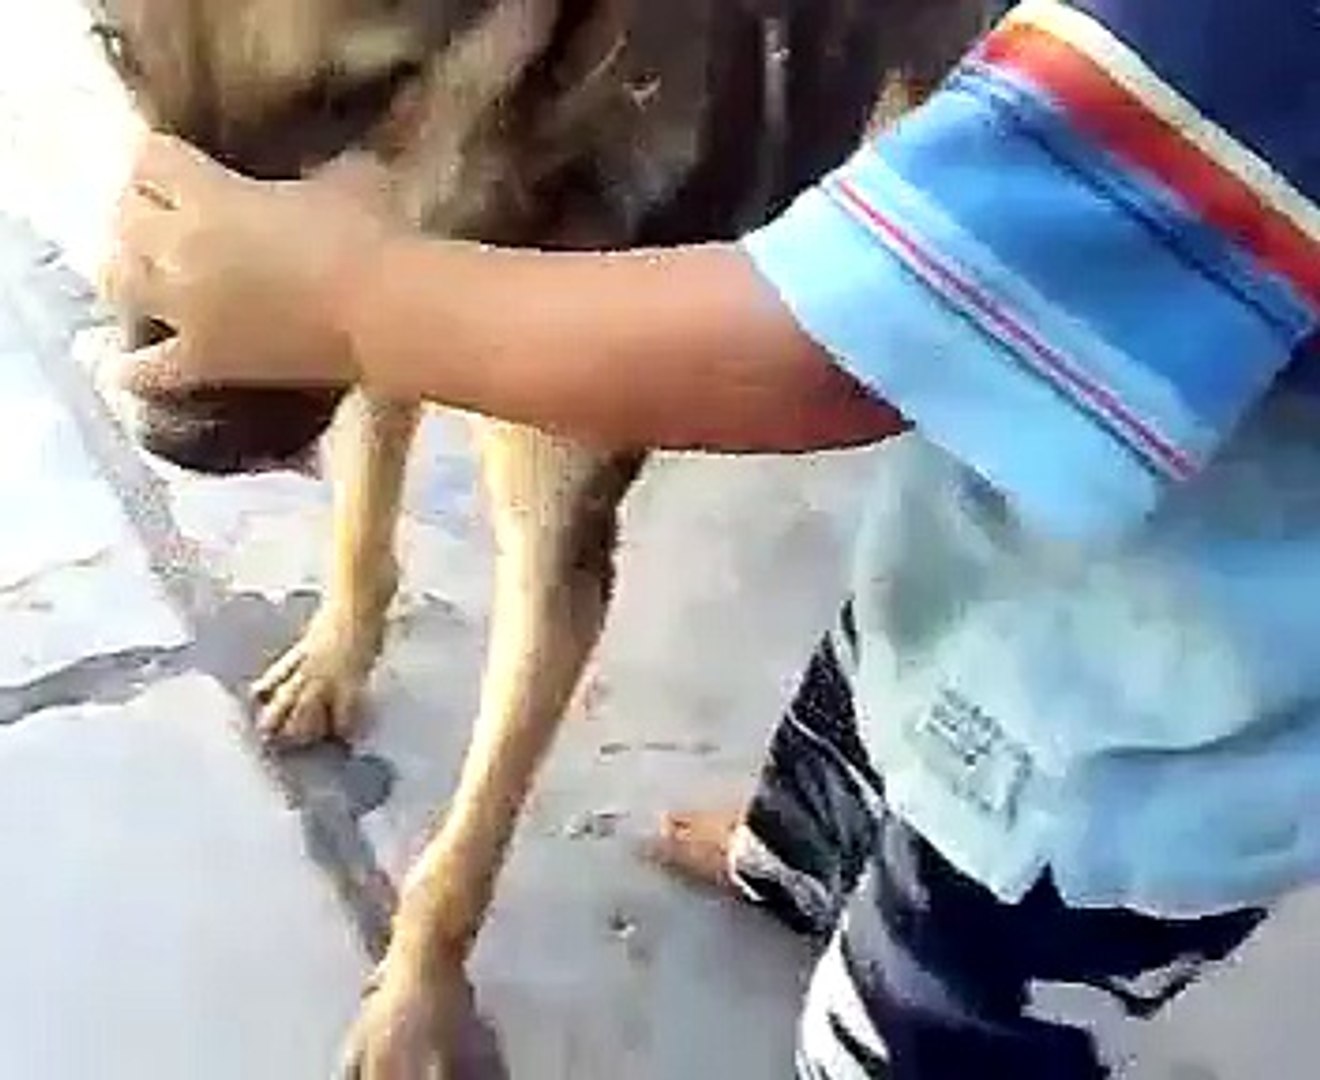 dog funny clip with child (amazon songs &clips)